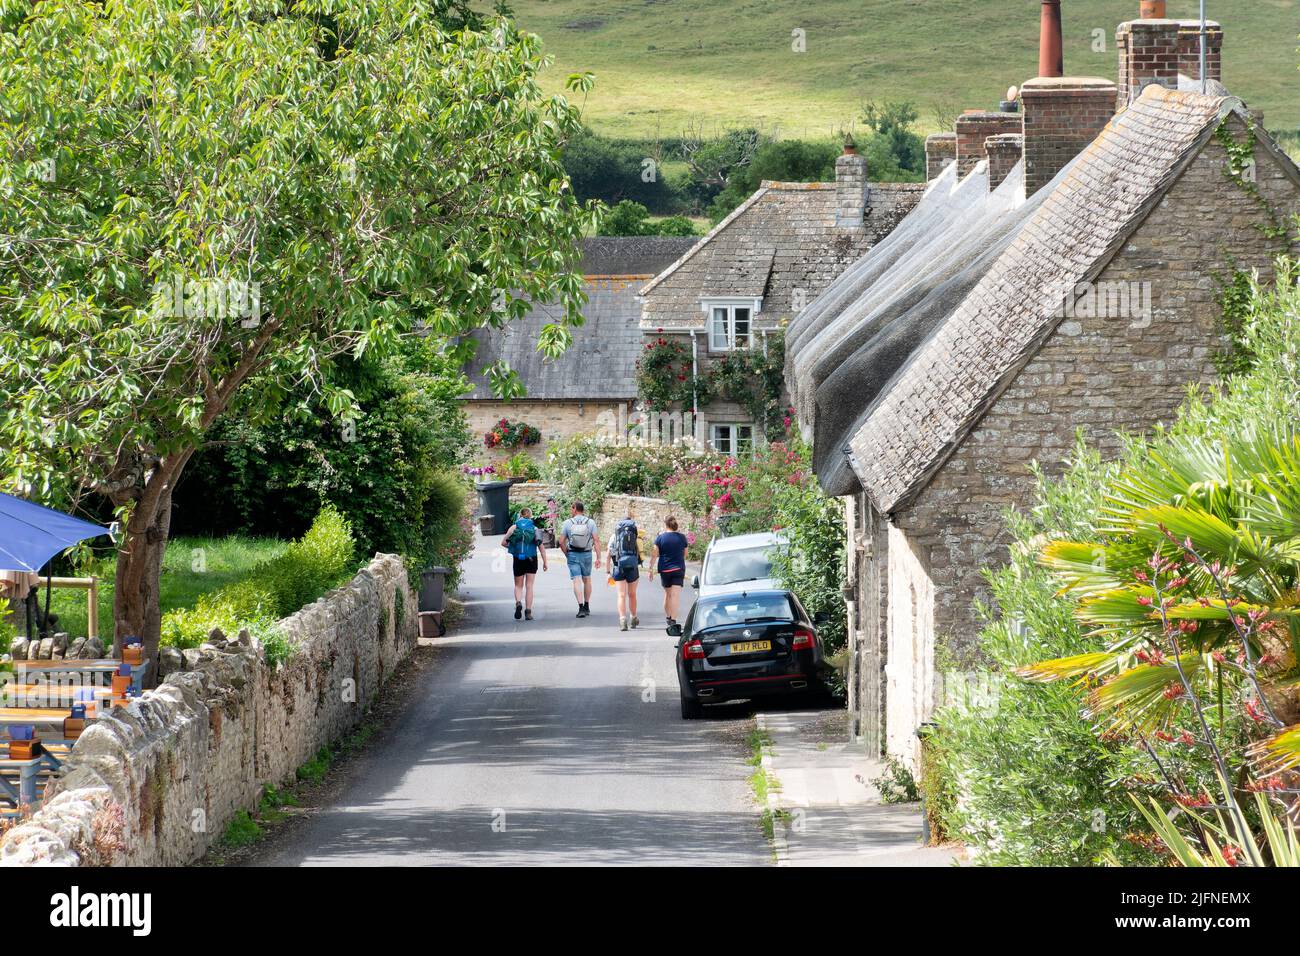 Kimmeridge, Dorset UK. Four young walkers make their way down the main road in a small traditional English village at the start of a hike or ramble. Stock Photo